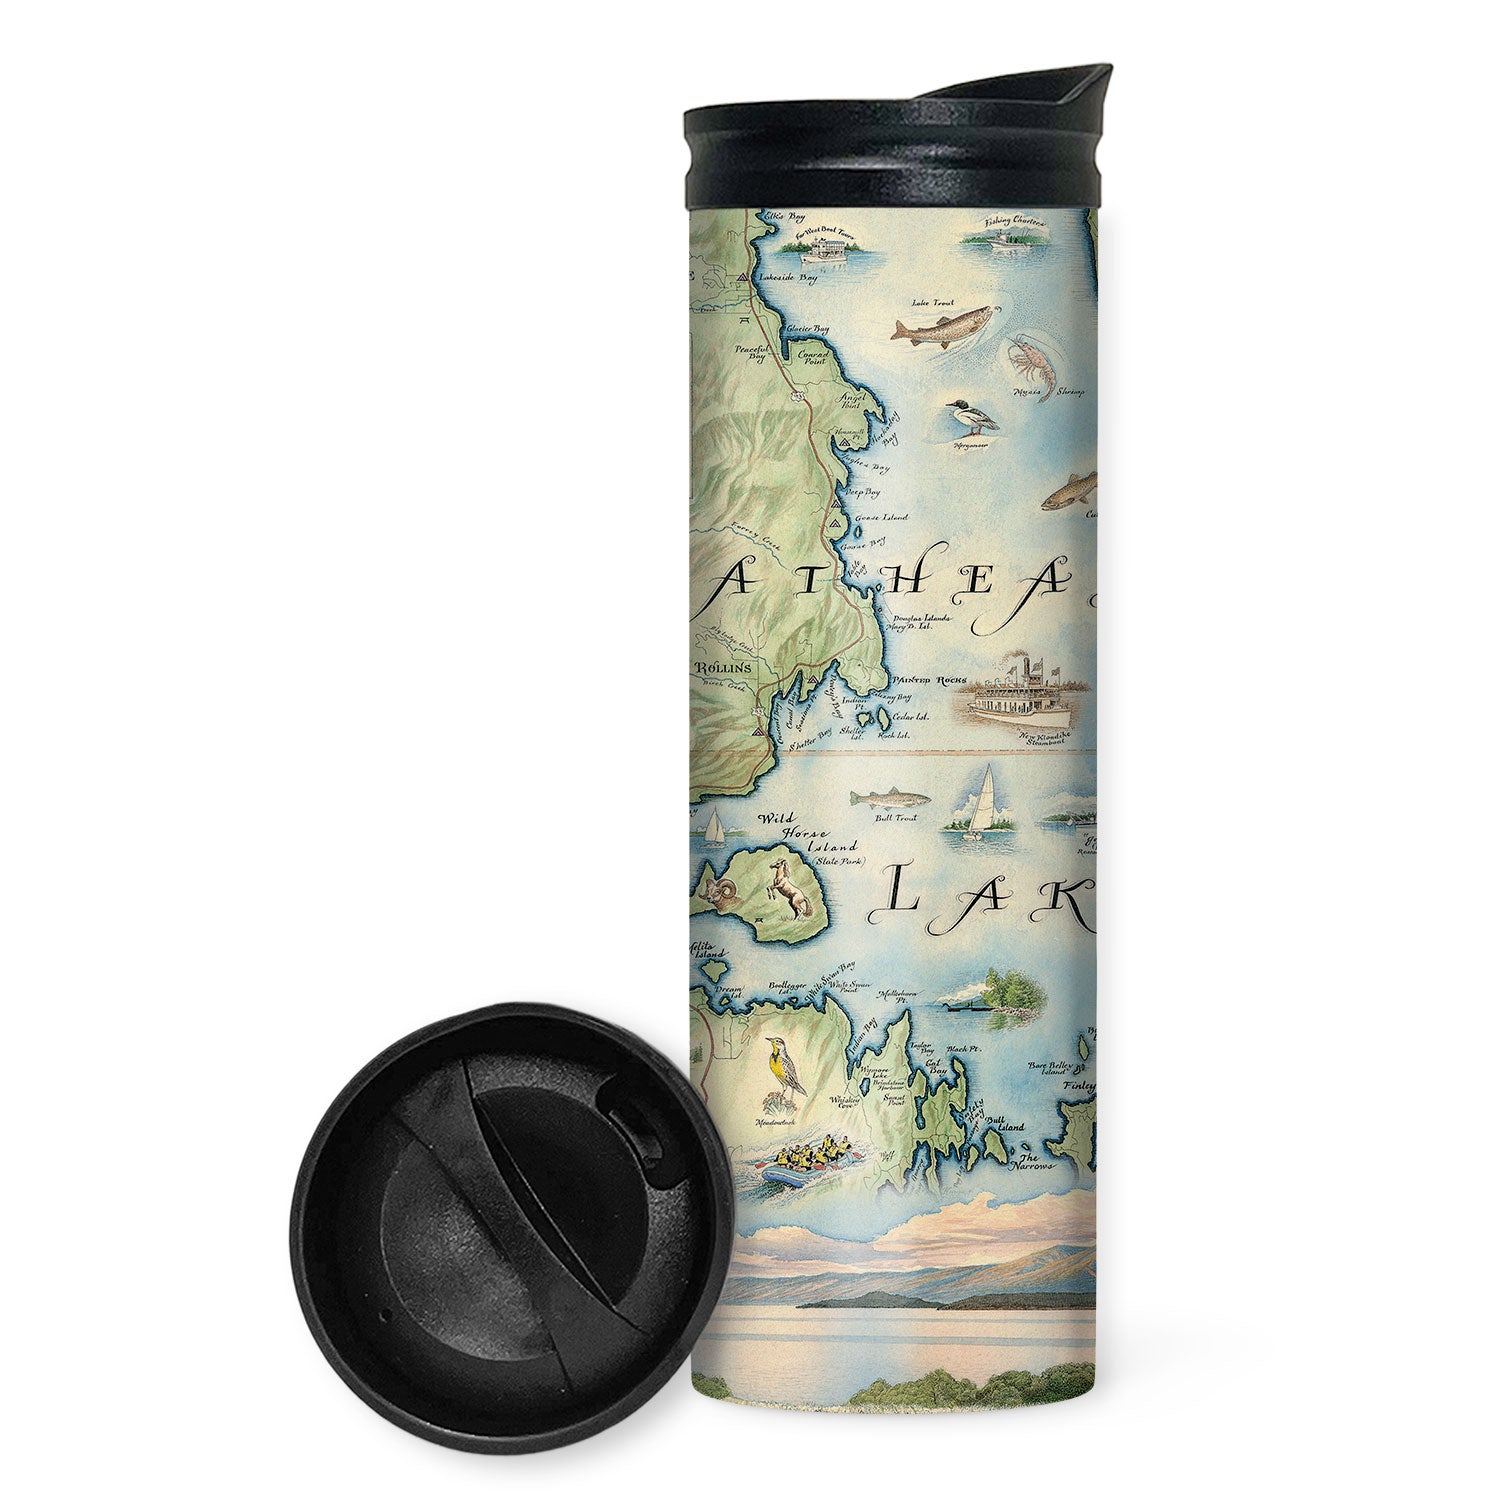 Northwest Montana's  Flathead Lake 16 oz travel Drinkware in green and blue colors.  The bottle is sitting on a rocky beach on Flathead Lake. The map features Golfing, Steamboat, Rafting, birds, eagles, Osprey, Bears, forest, water, deer, mountain lion, fish, Cherry Blossoms, and flowers like Glacier Lilies and Lady Slippers. Cities and landmarks are noted such as Woods Bay, Wild Horse Island, Finley Point, and Big Arm. 